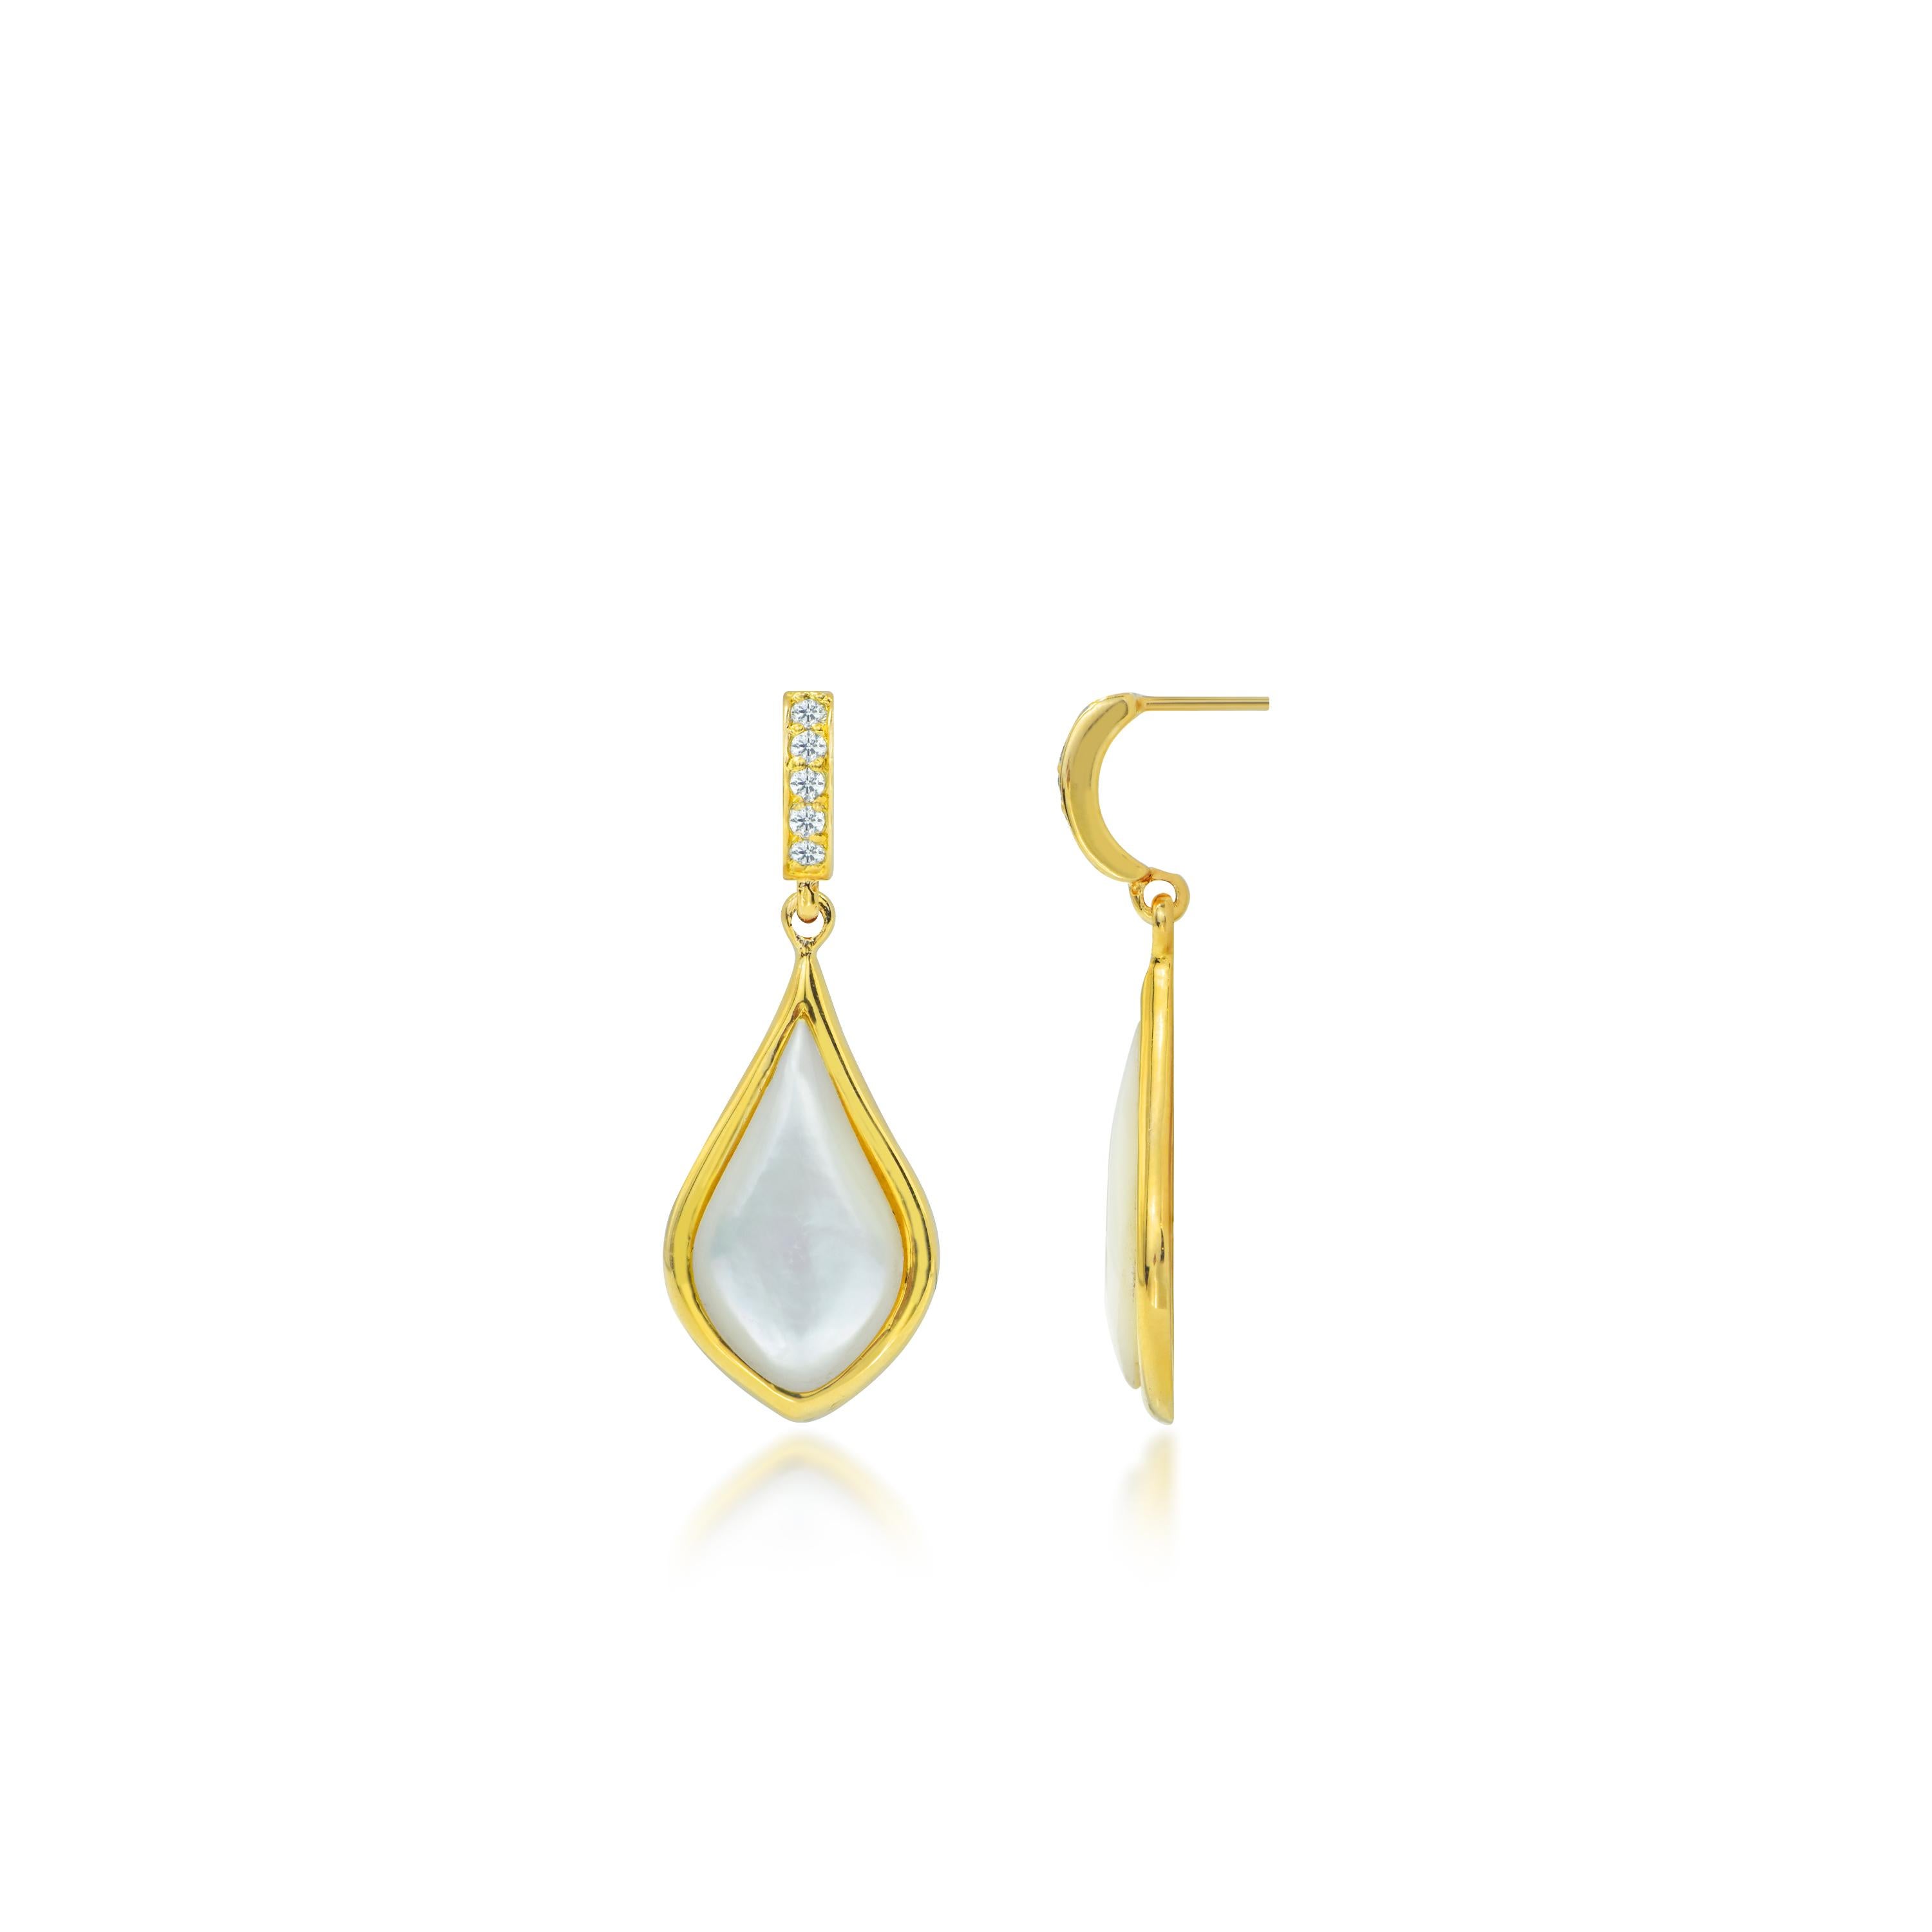 Add a touch of glamour to your ensemble with these exquisite 18K genuine gold filled drop earrings. Crafted with Mother of Pearl (MOP) and adorned with natural zircon stones, these earrings radiate elegance and sophistication. Elevate your style and